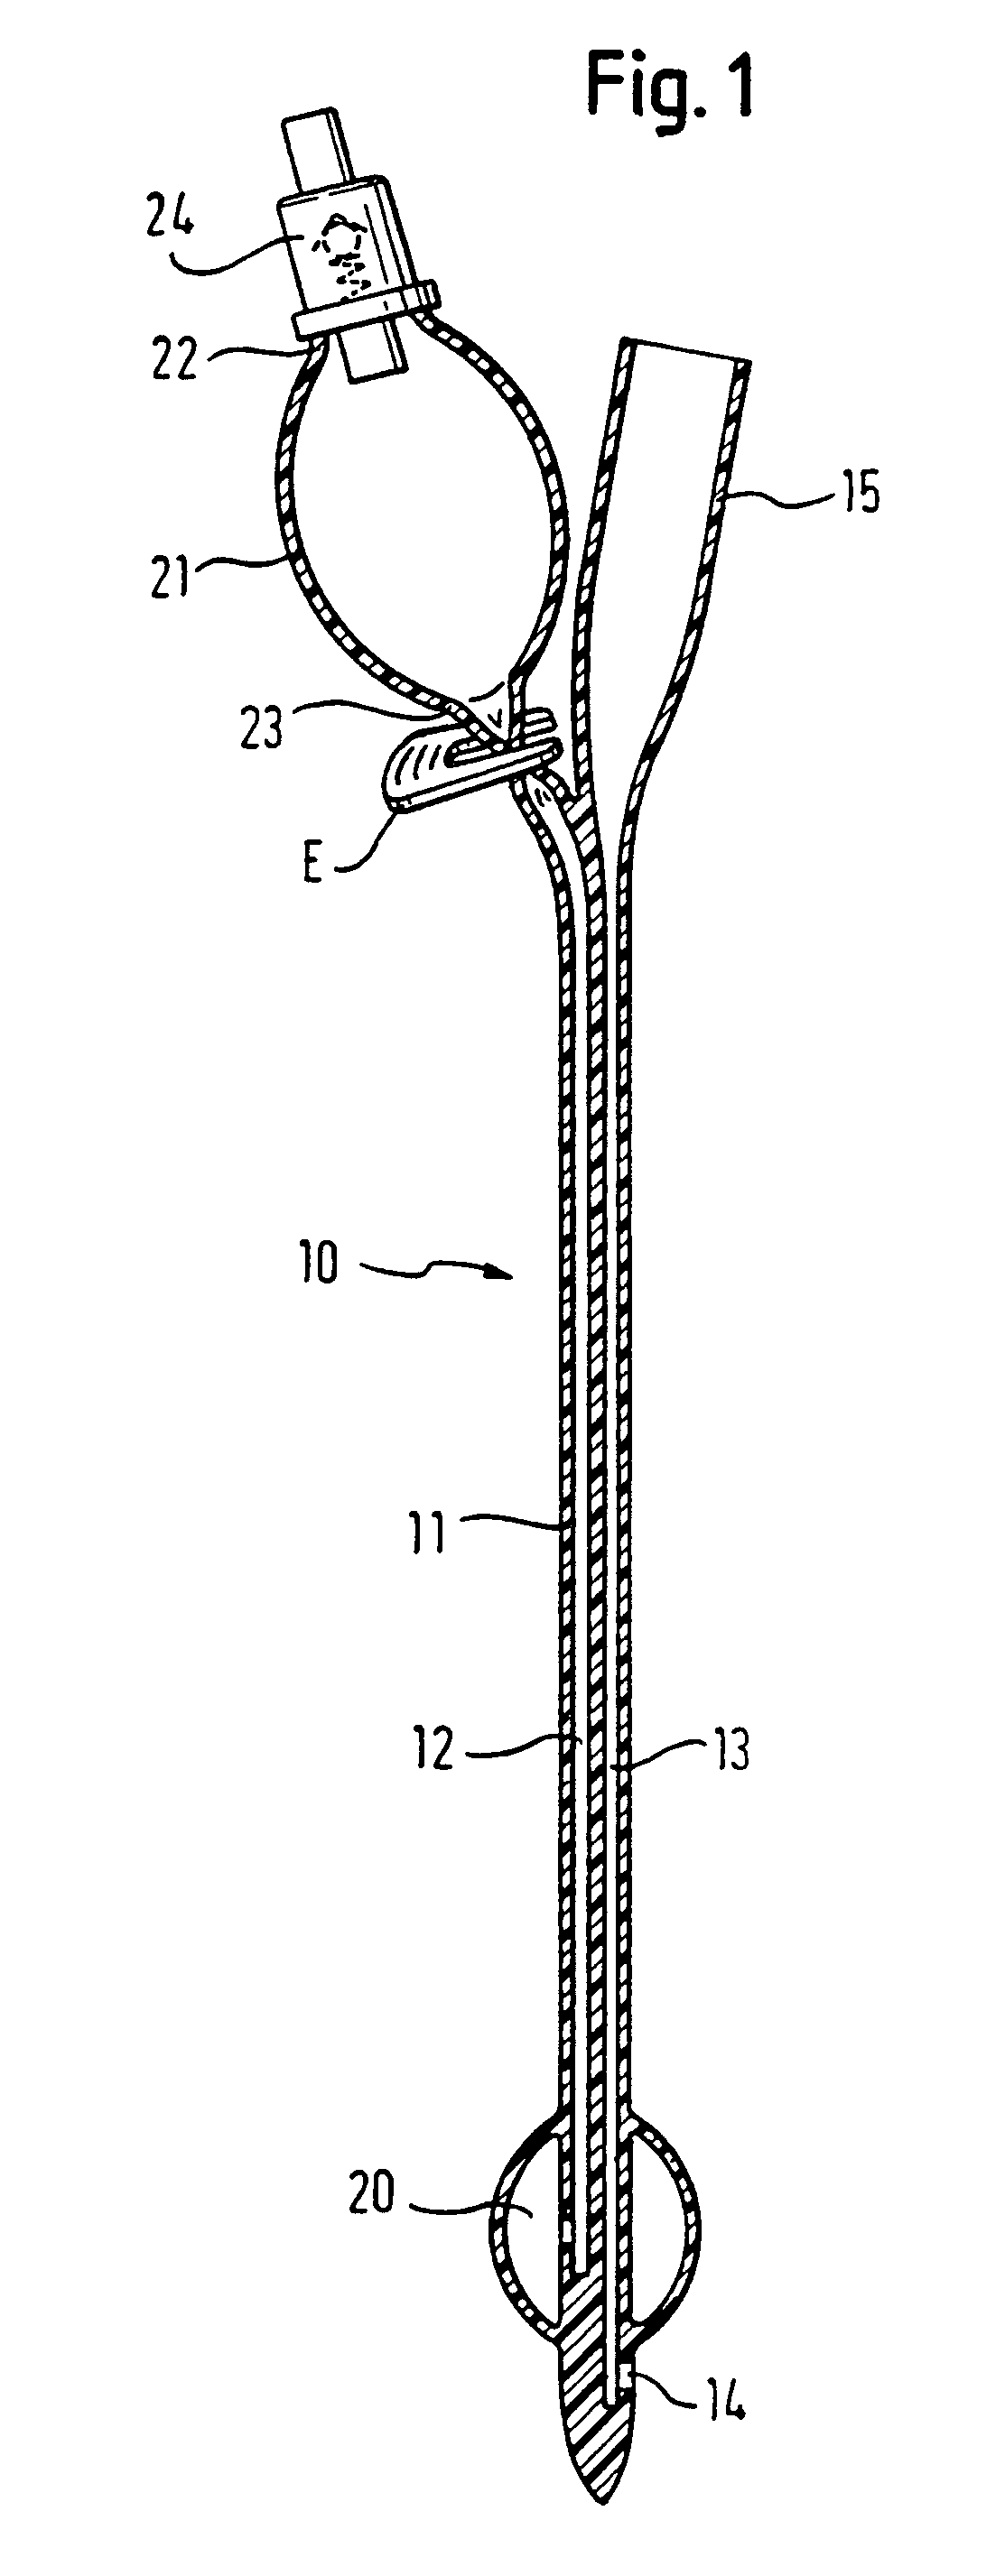 Medical device with elastomeric bulb